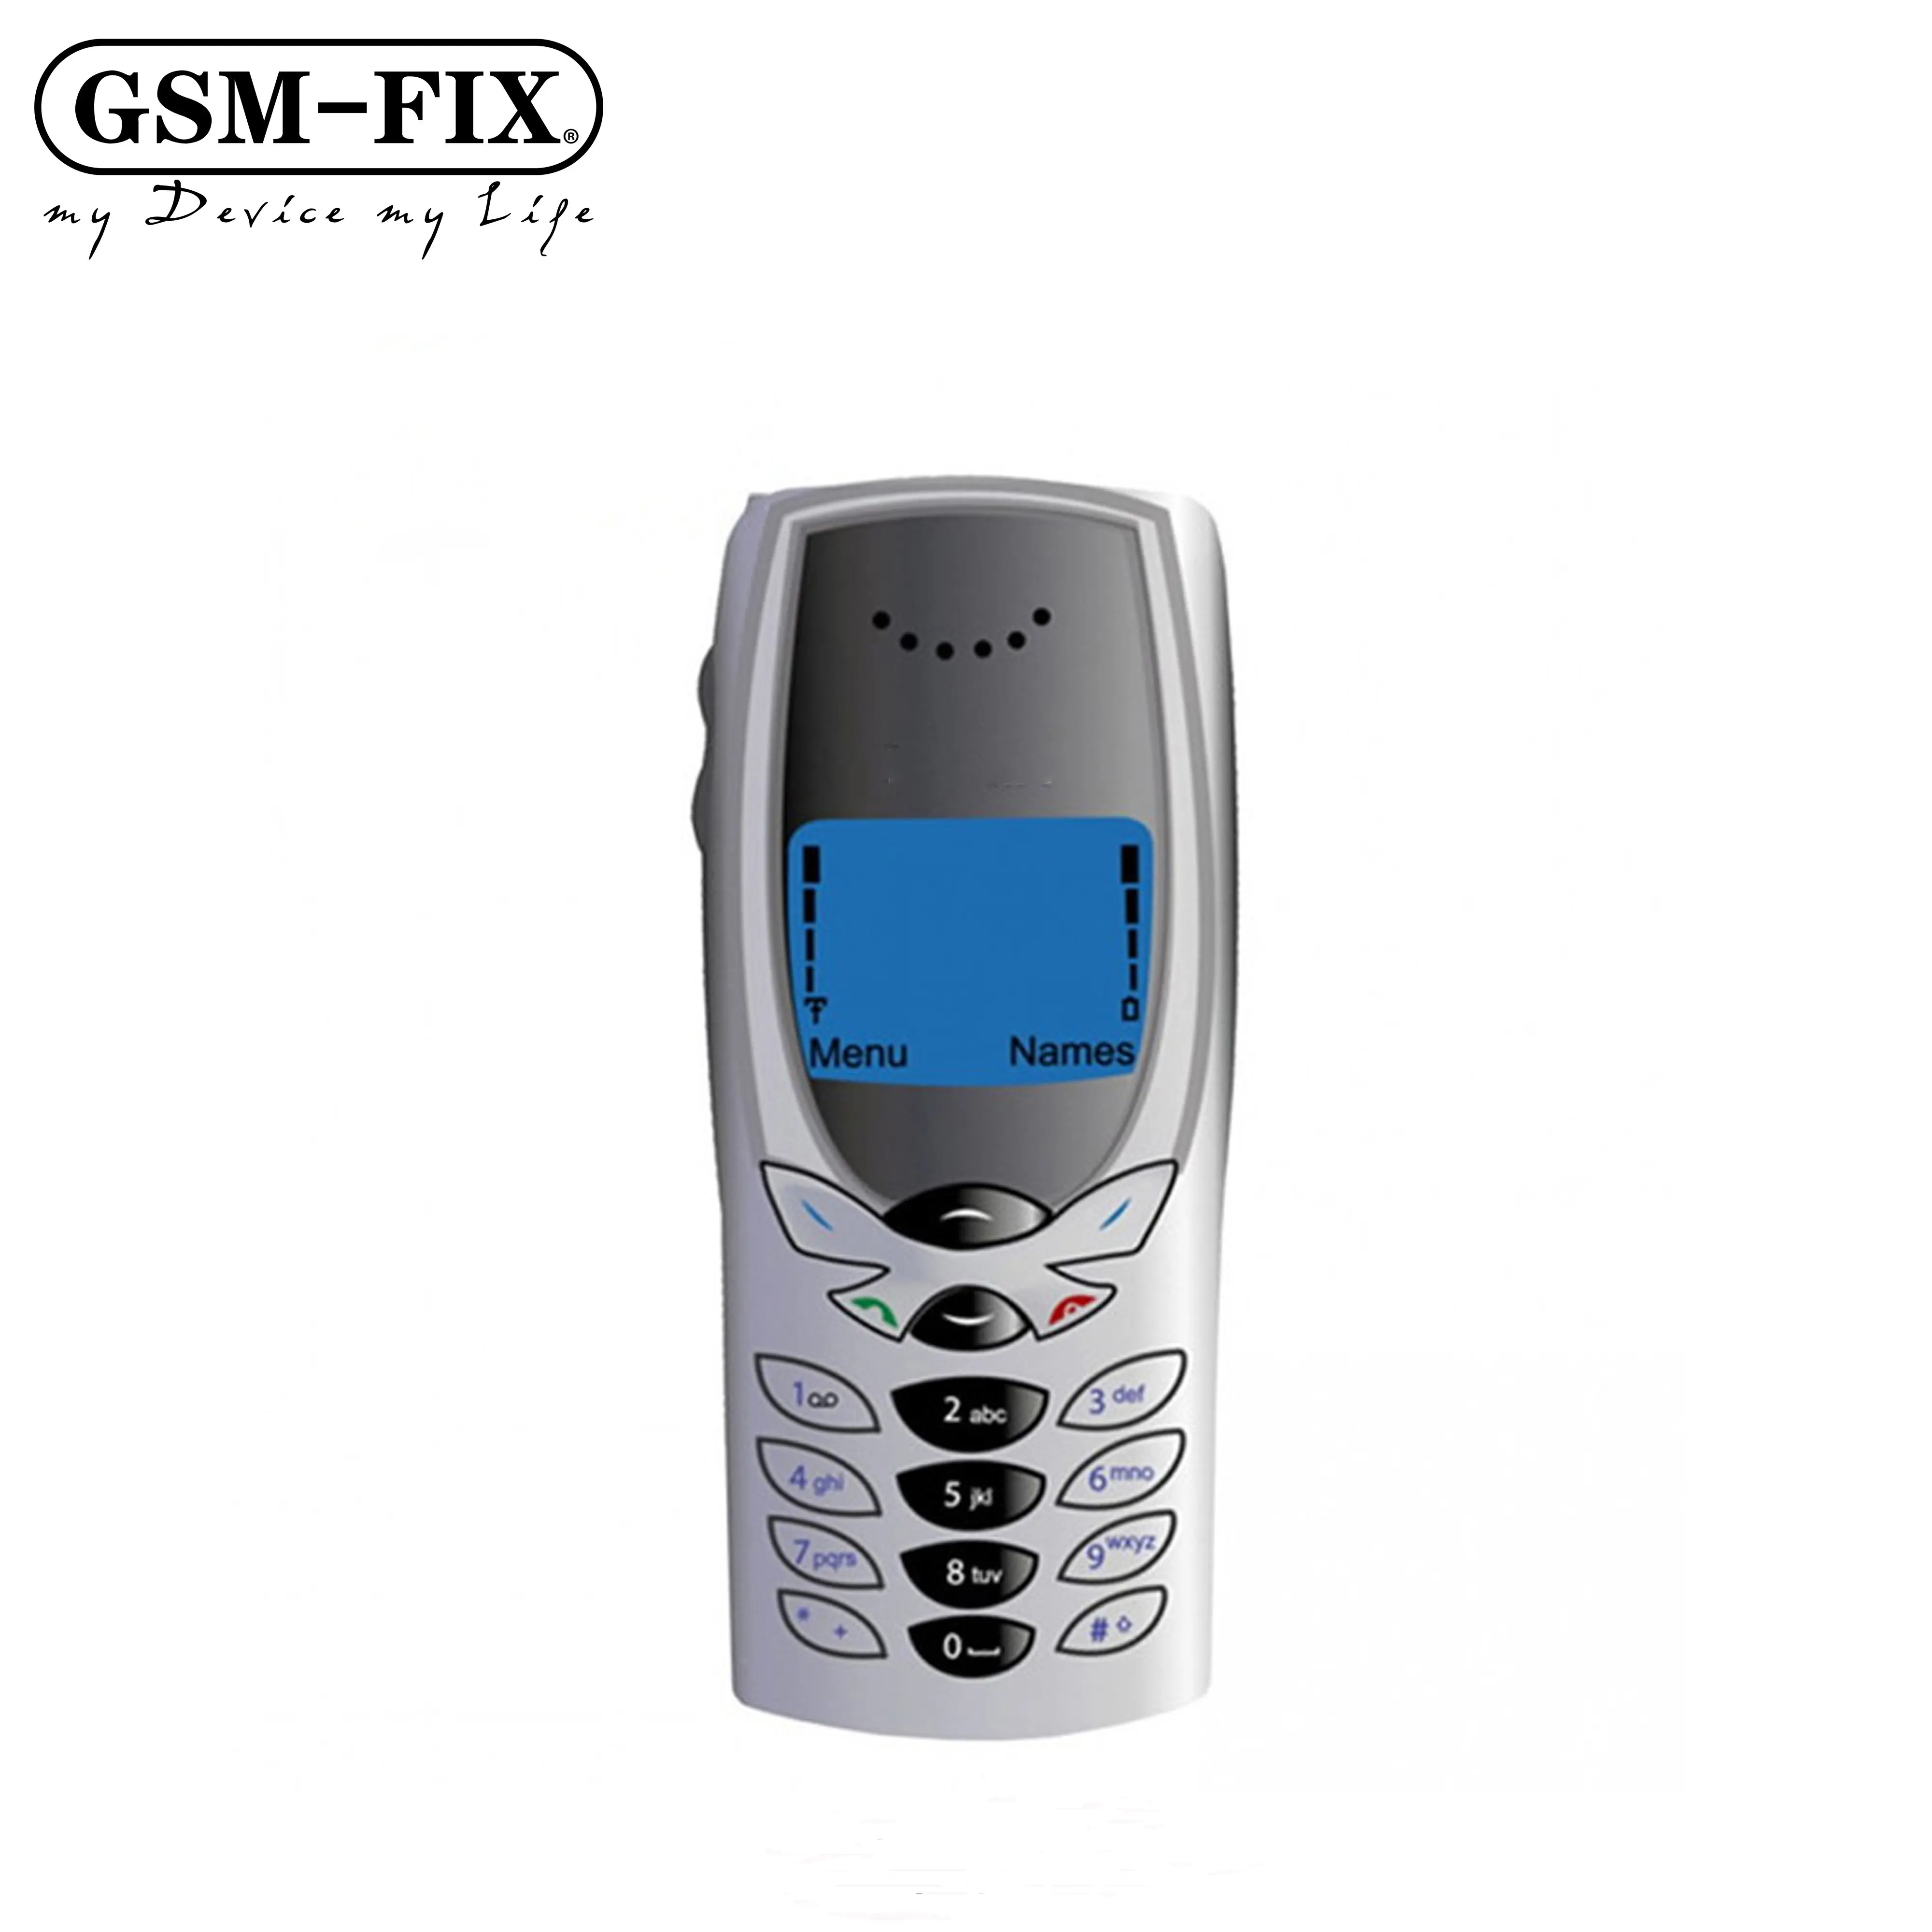 GSM-FIX Cheapest For Nokia 8250 Mobile Phone 2G GSM 900/1800 Unlocked 8250 with High Power capacity Feature Cellphone